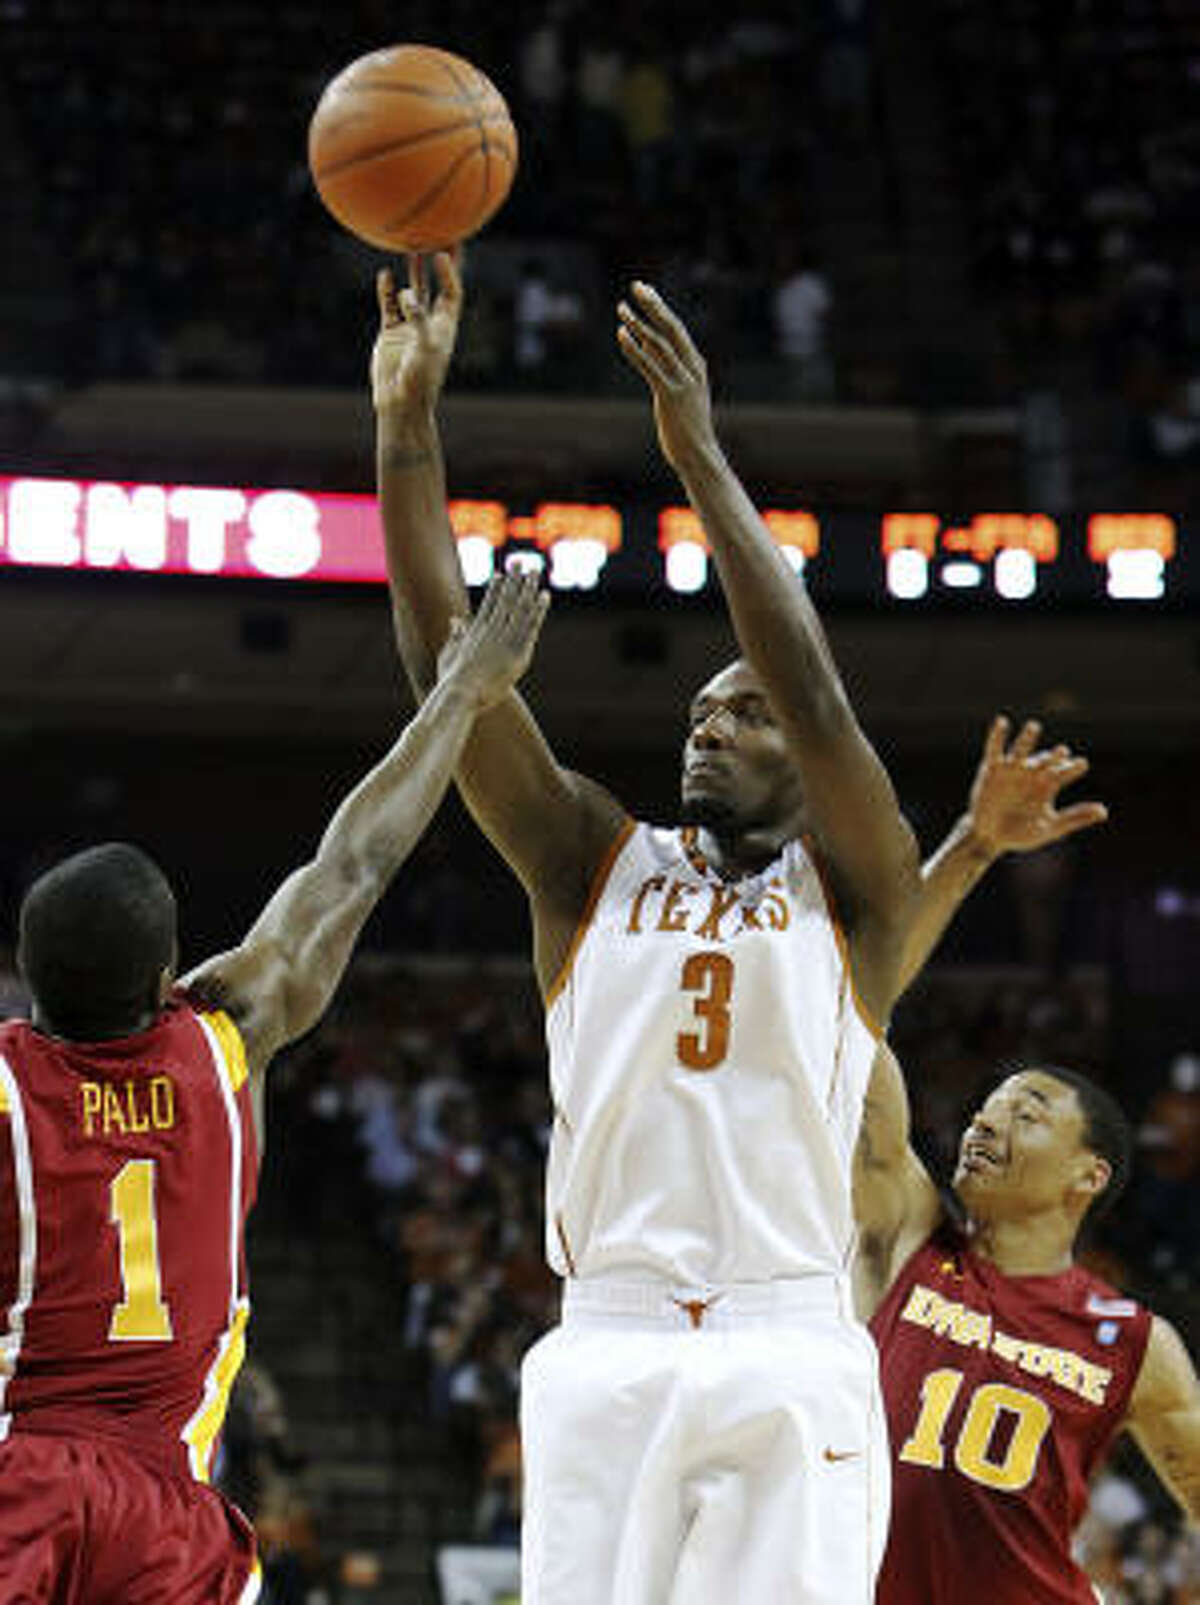 Texas guard Jordan Hamilton looks to score two of his game-high 20 points on Tuesday night.